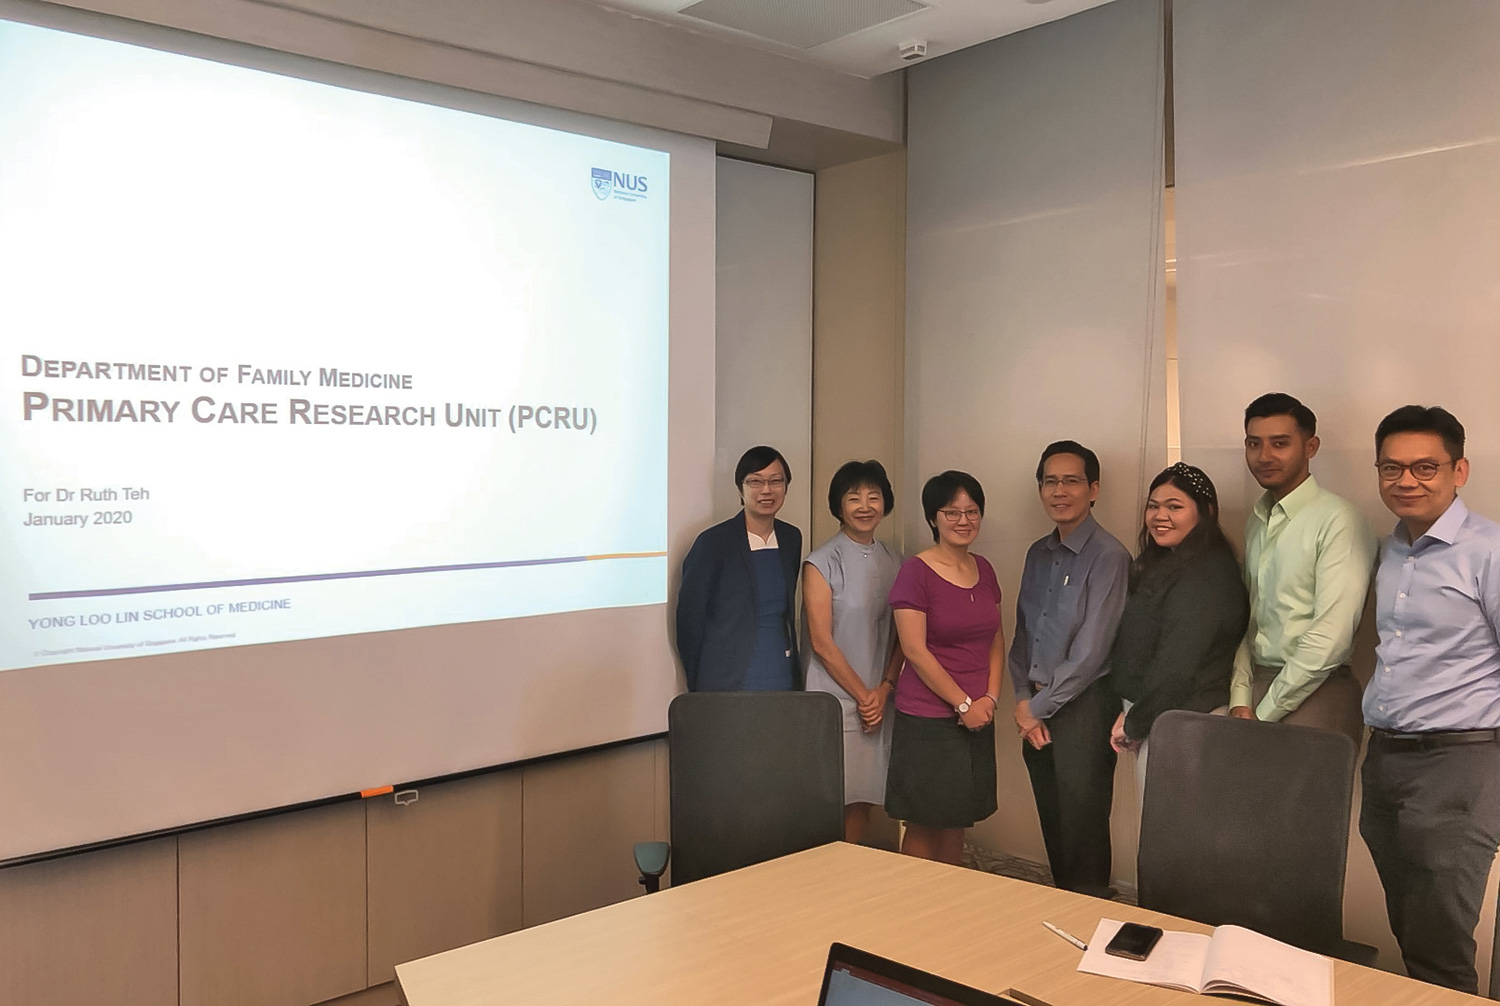 Dr Ruth Teh’s (third from left) visit to DFM in January 2020